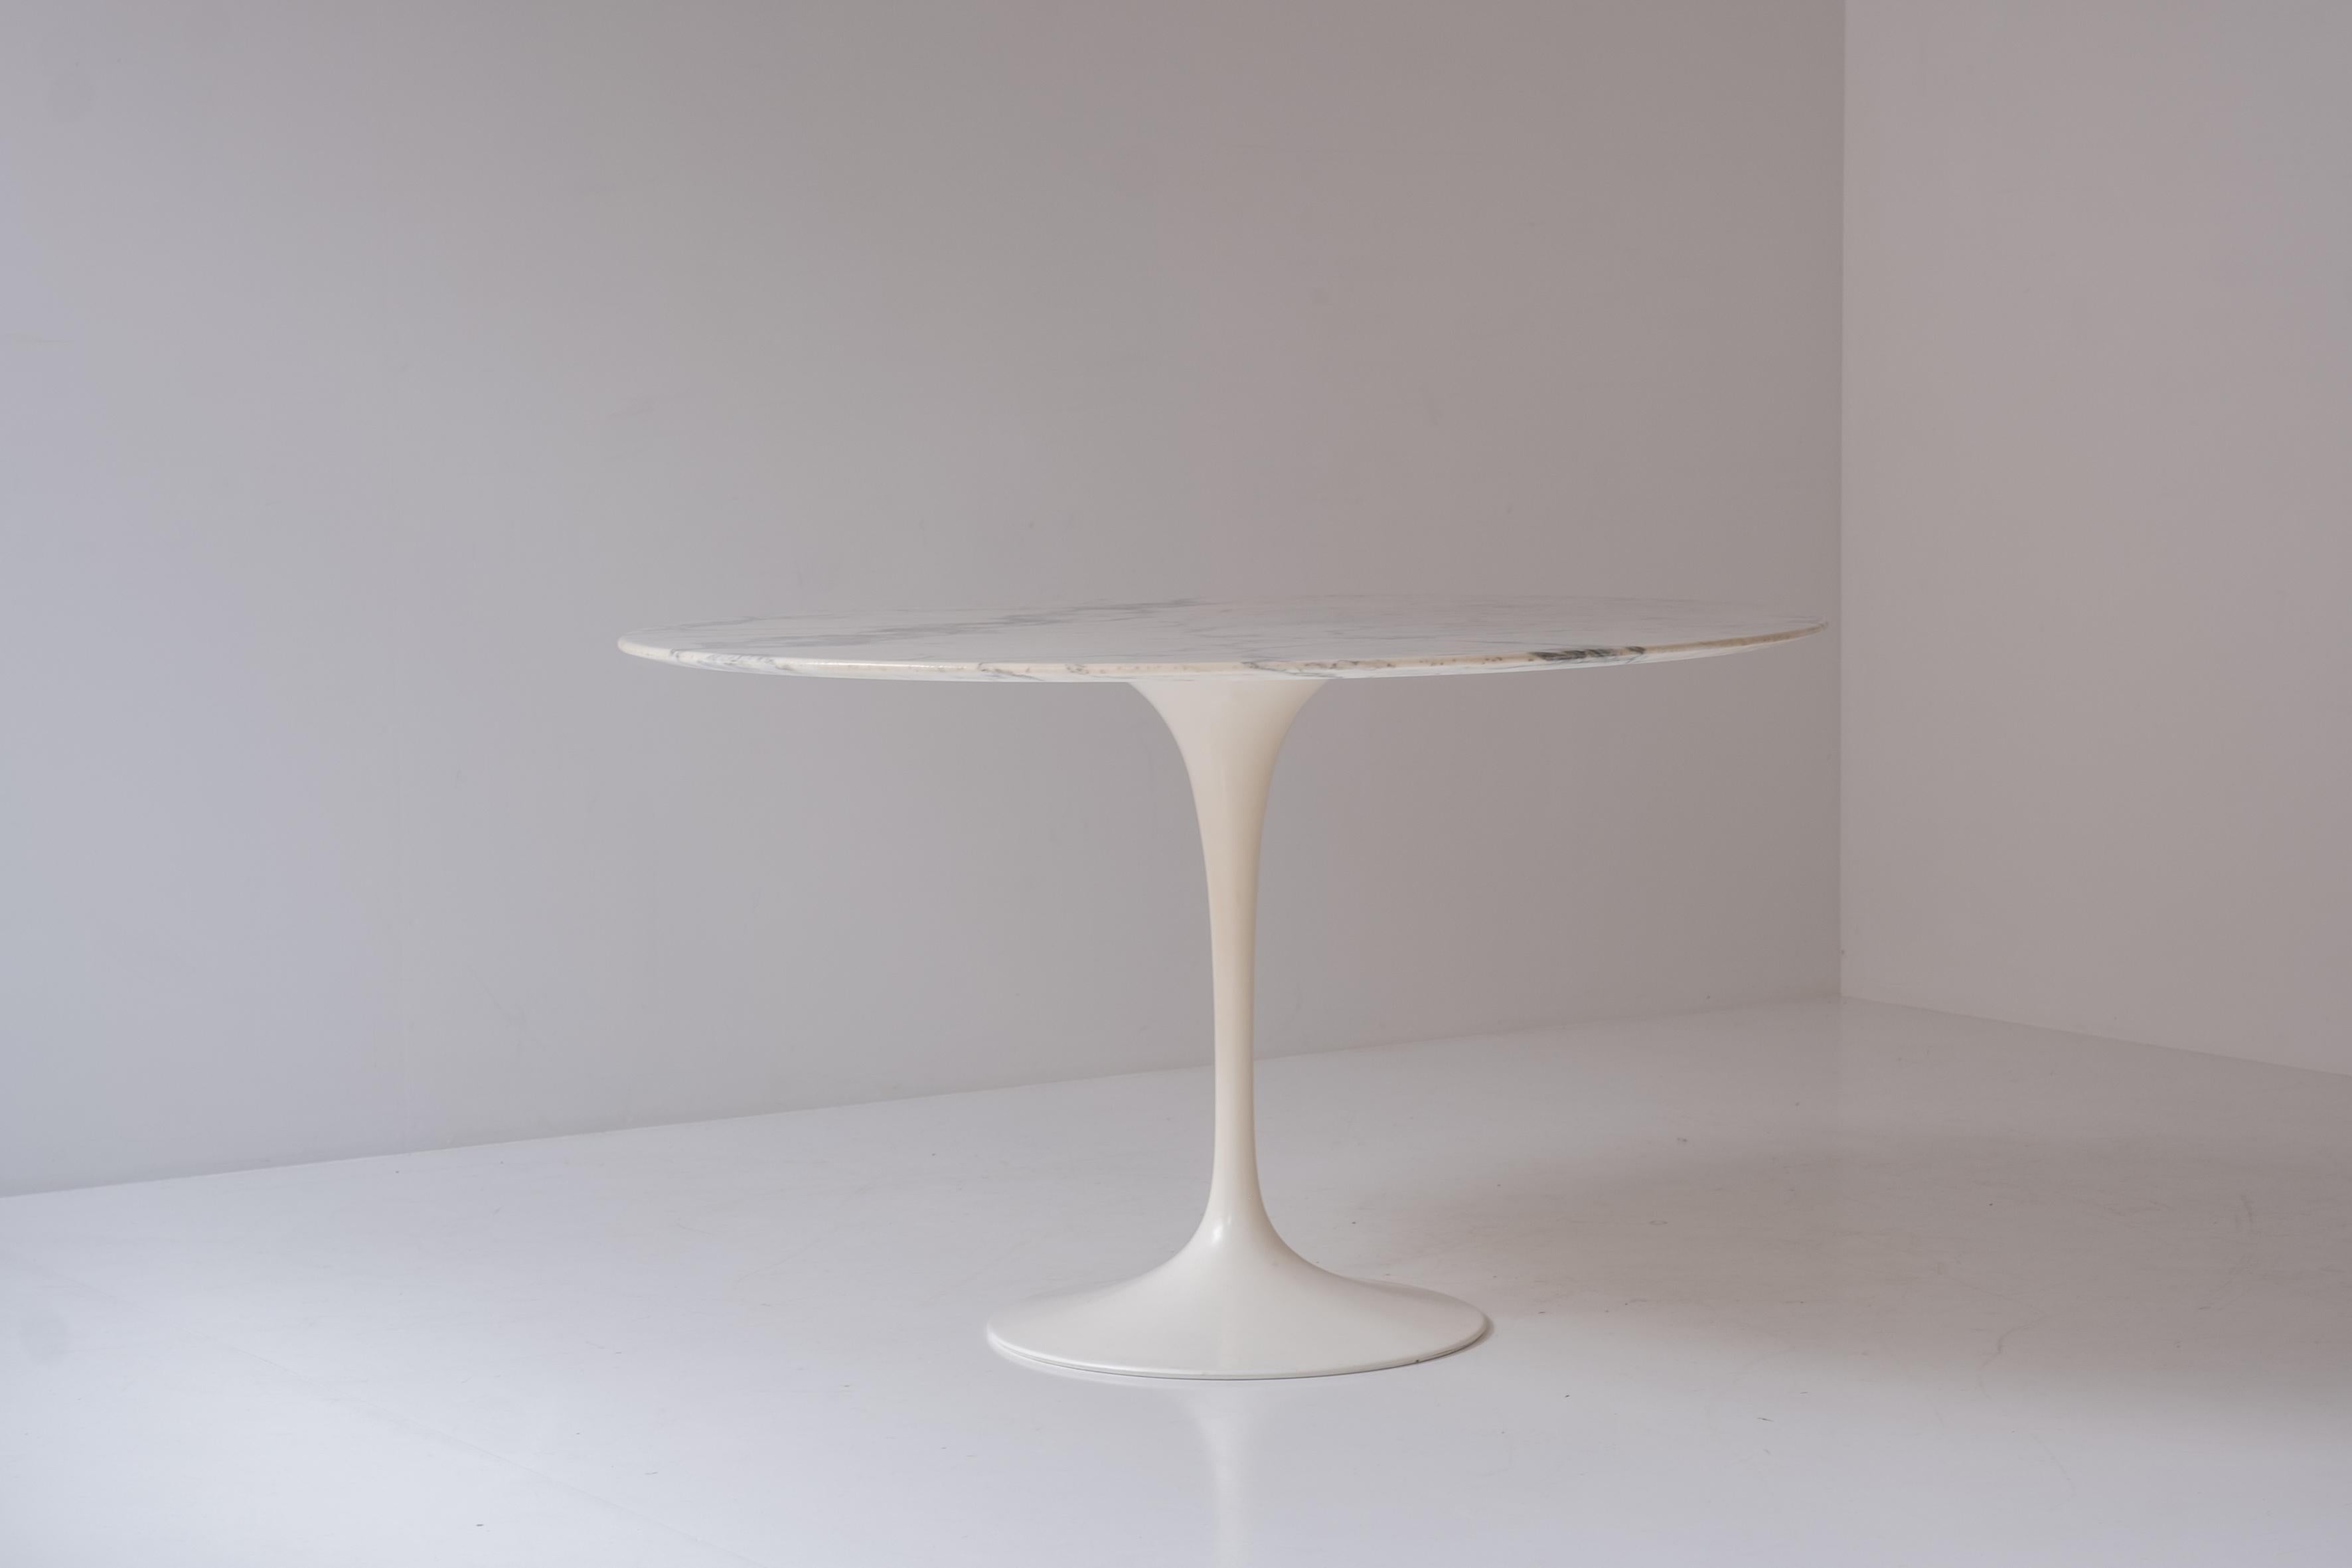 Early tulip round dining table by Eero Saarinen for Knoll International, Italy 1970s. This iconic piece features a beautiful Arabescato marble with a white base. This piece remains in a very good condition with only minor wear. Signed underneath